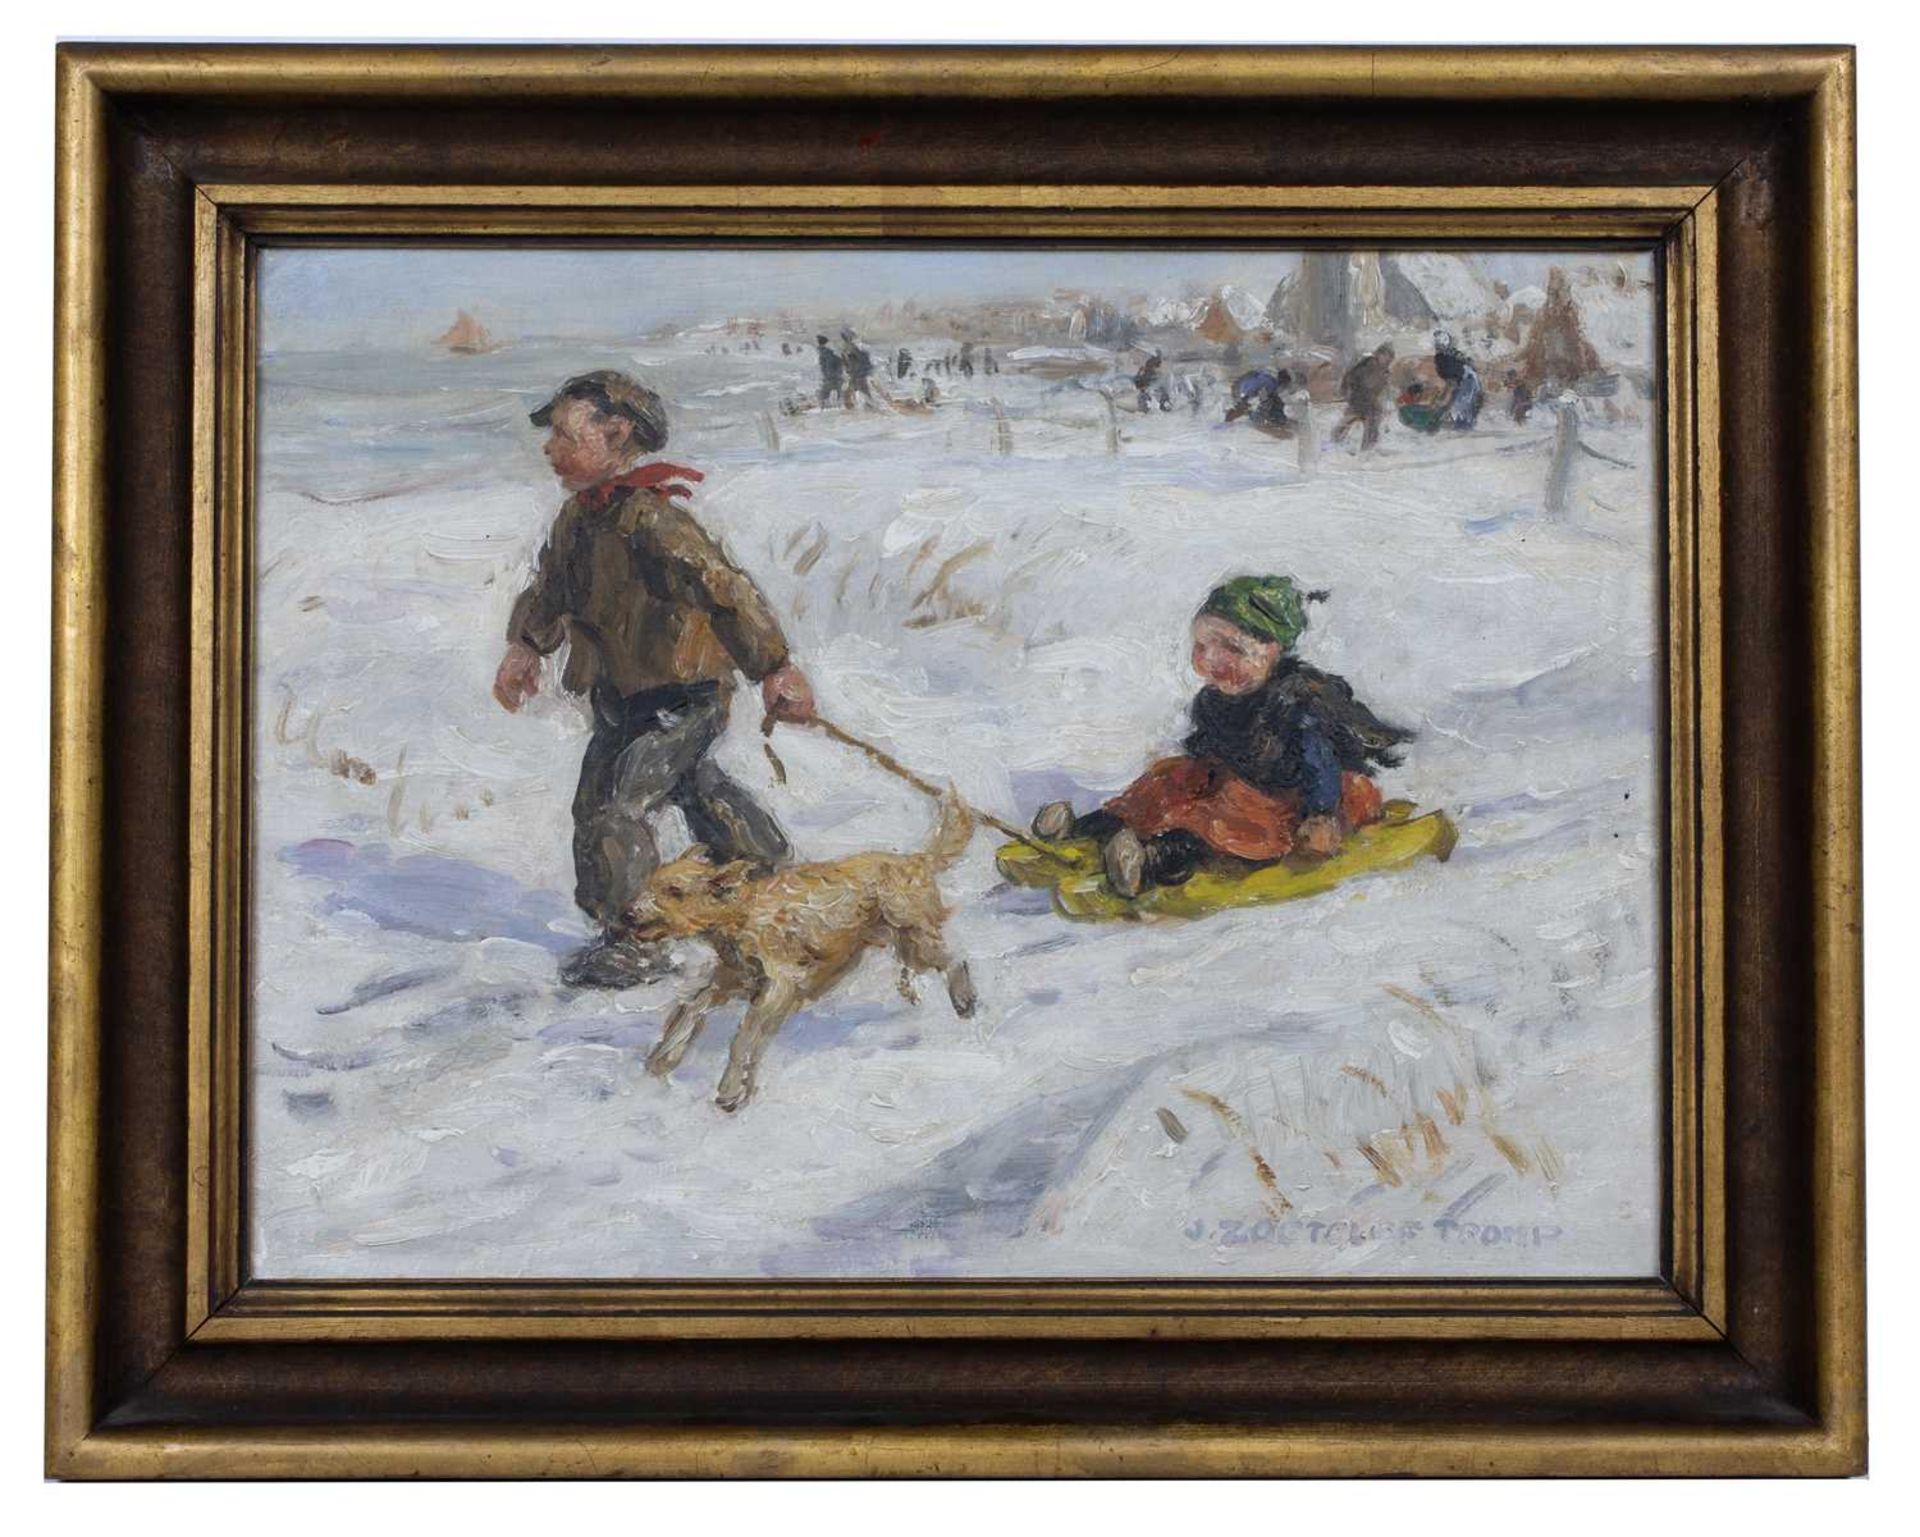 Jan Zoetelief Tromp (1872-1947) 'Children sledging with a dog', oil on canvas, signed lower right, - Image 2 of 3